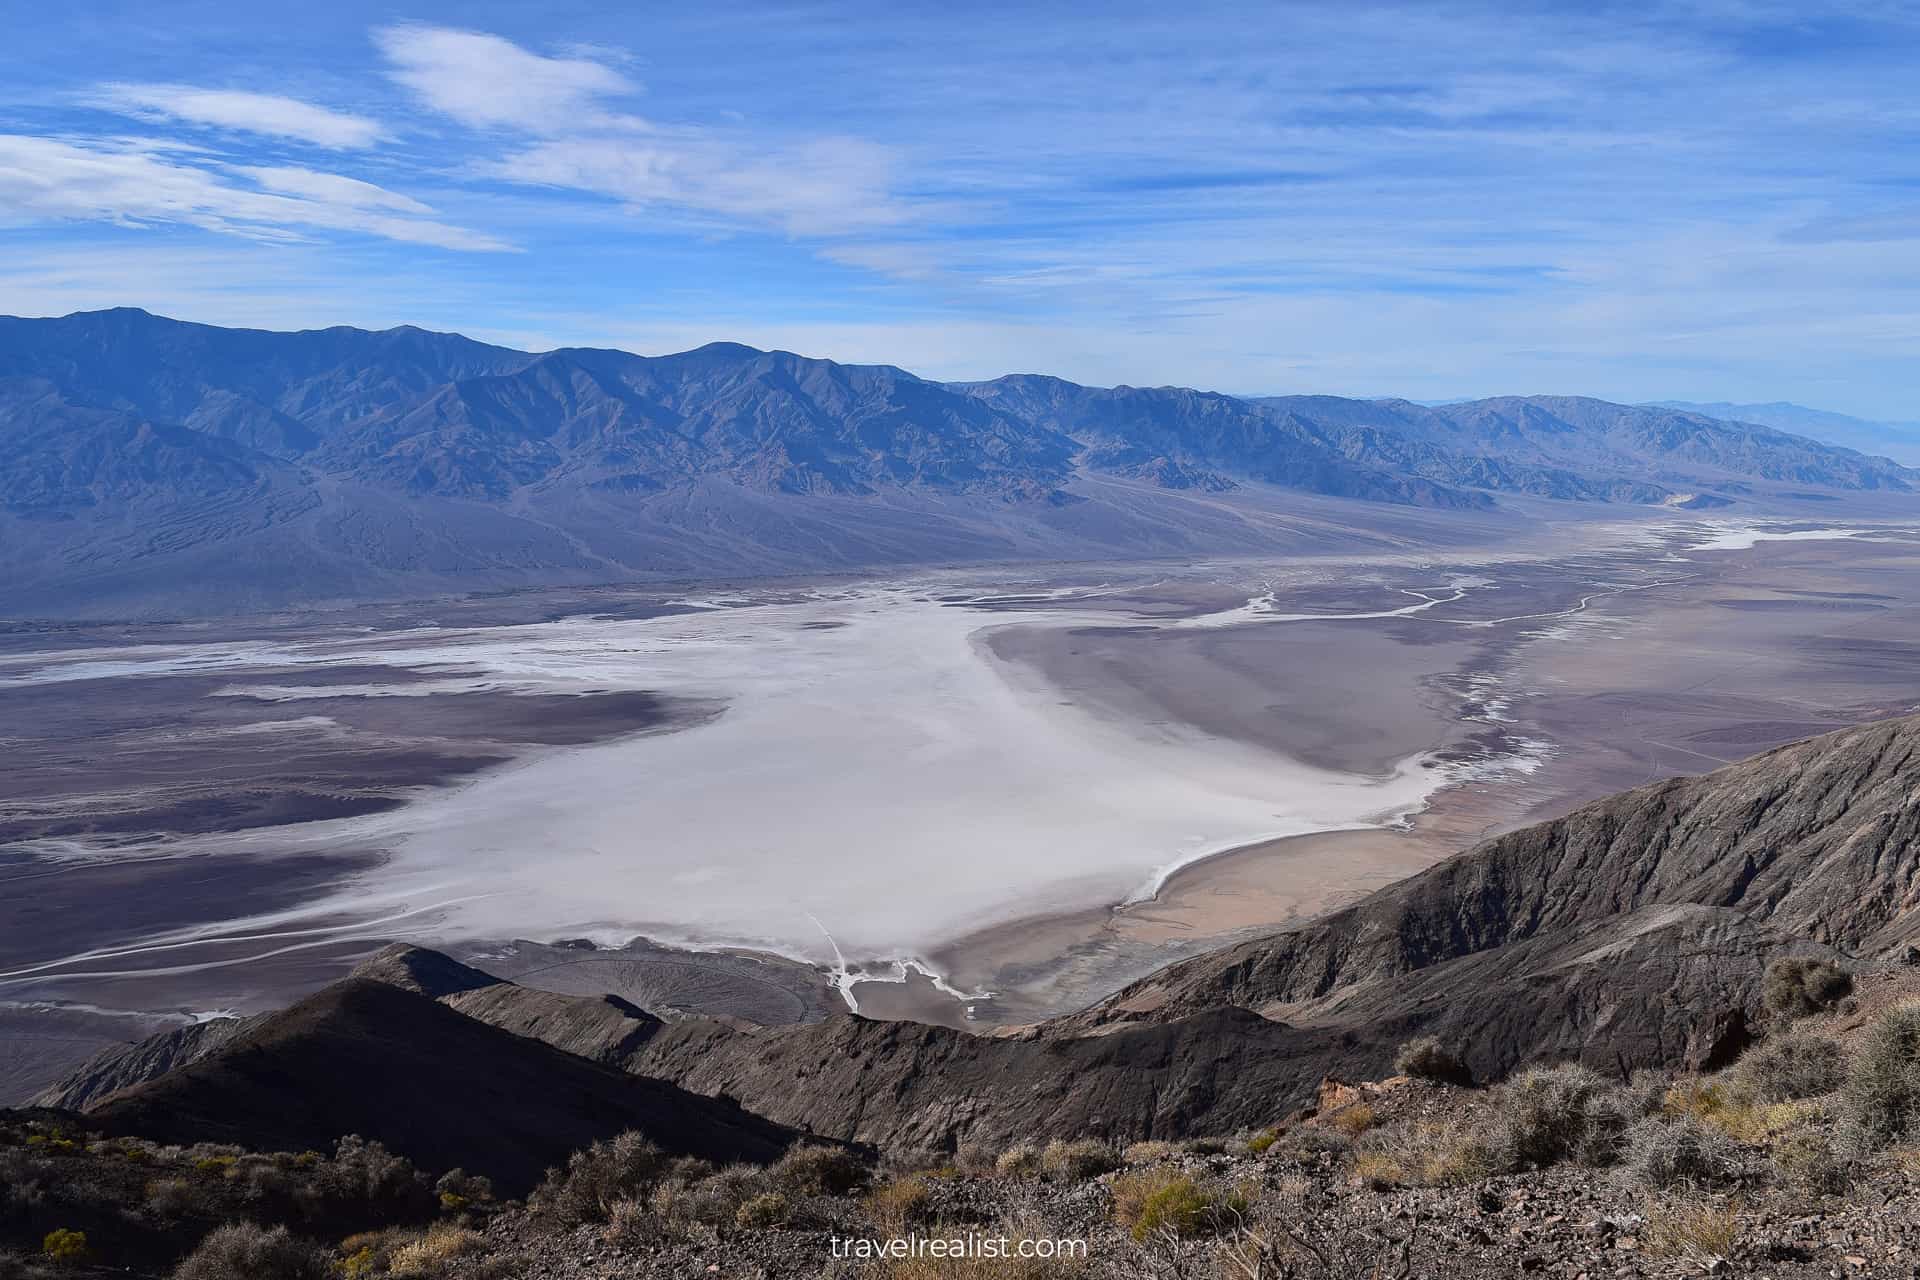 Dantes View and Badwater Basin below in Death Valley National Park, California, US